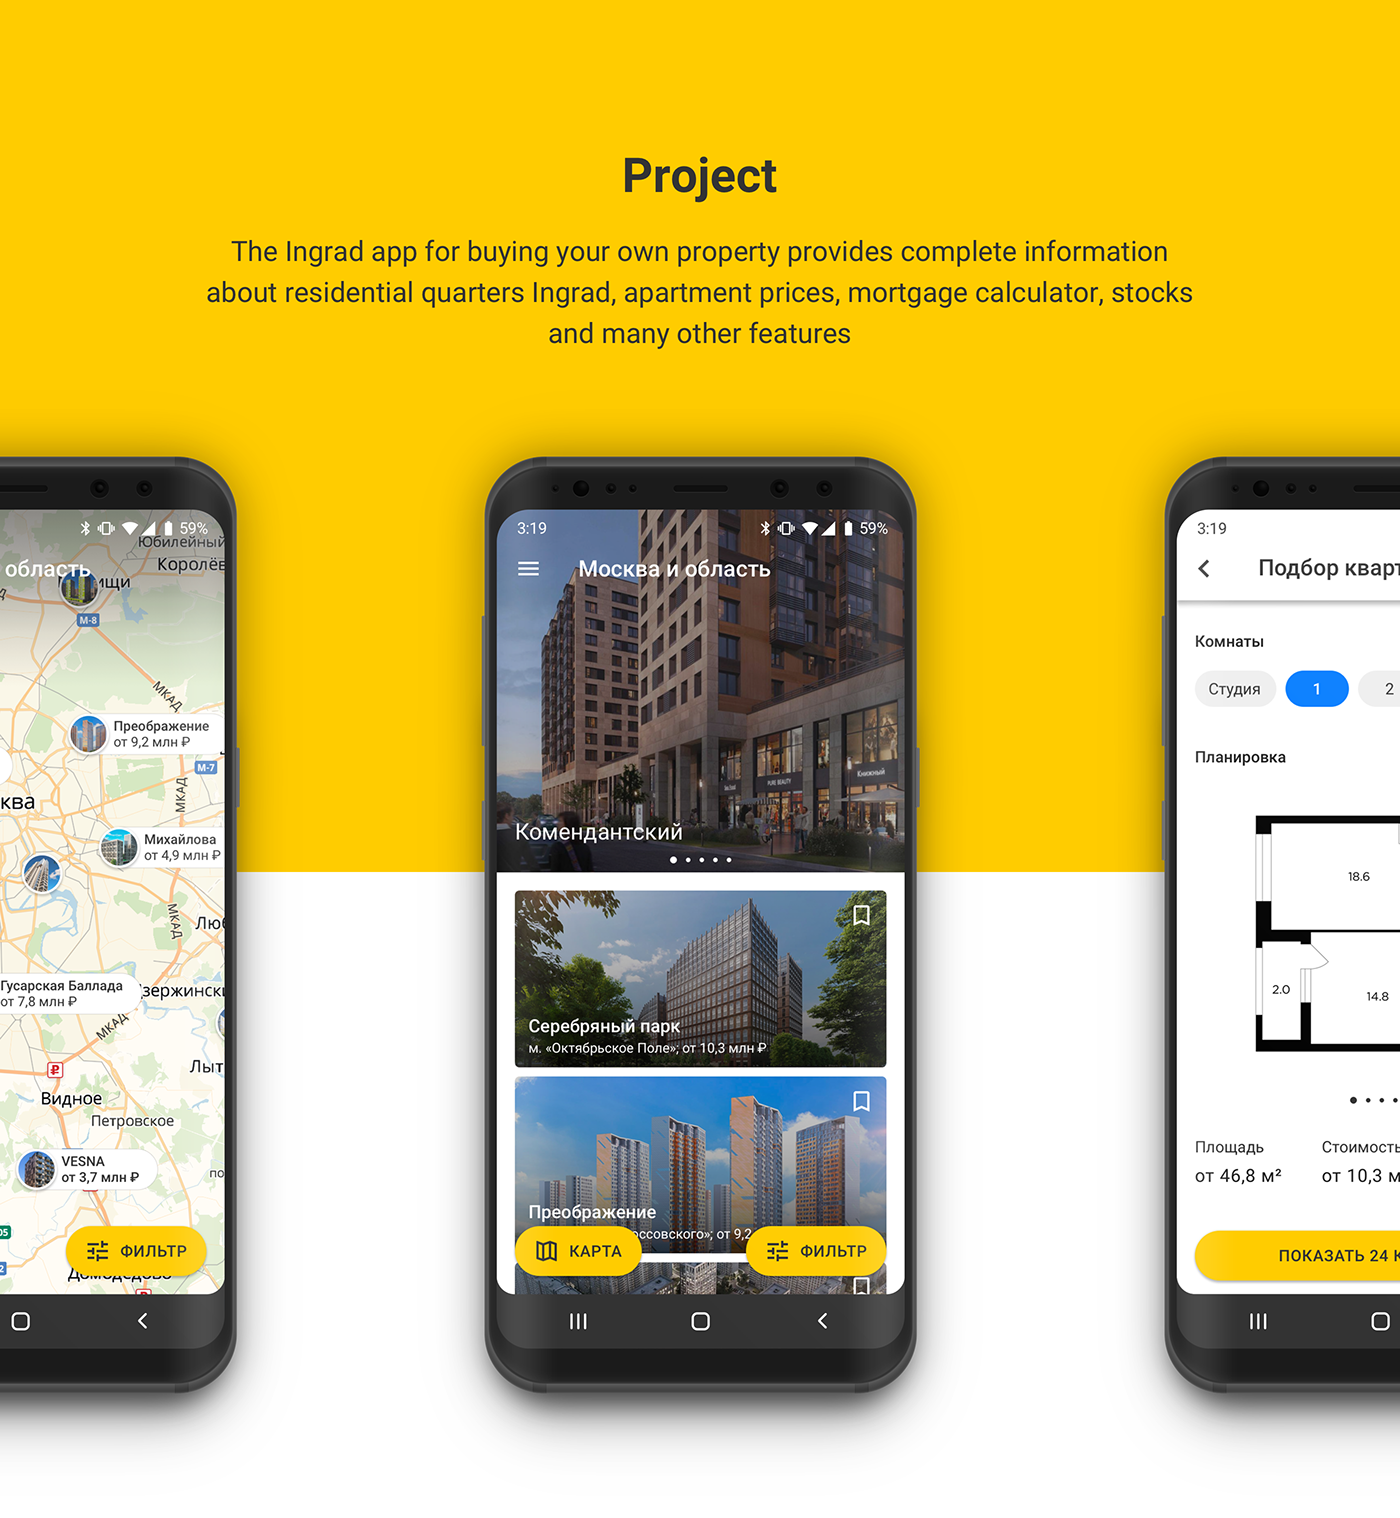 Mobile app inspiration example #402: Ingrad Android App